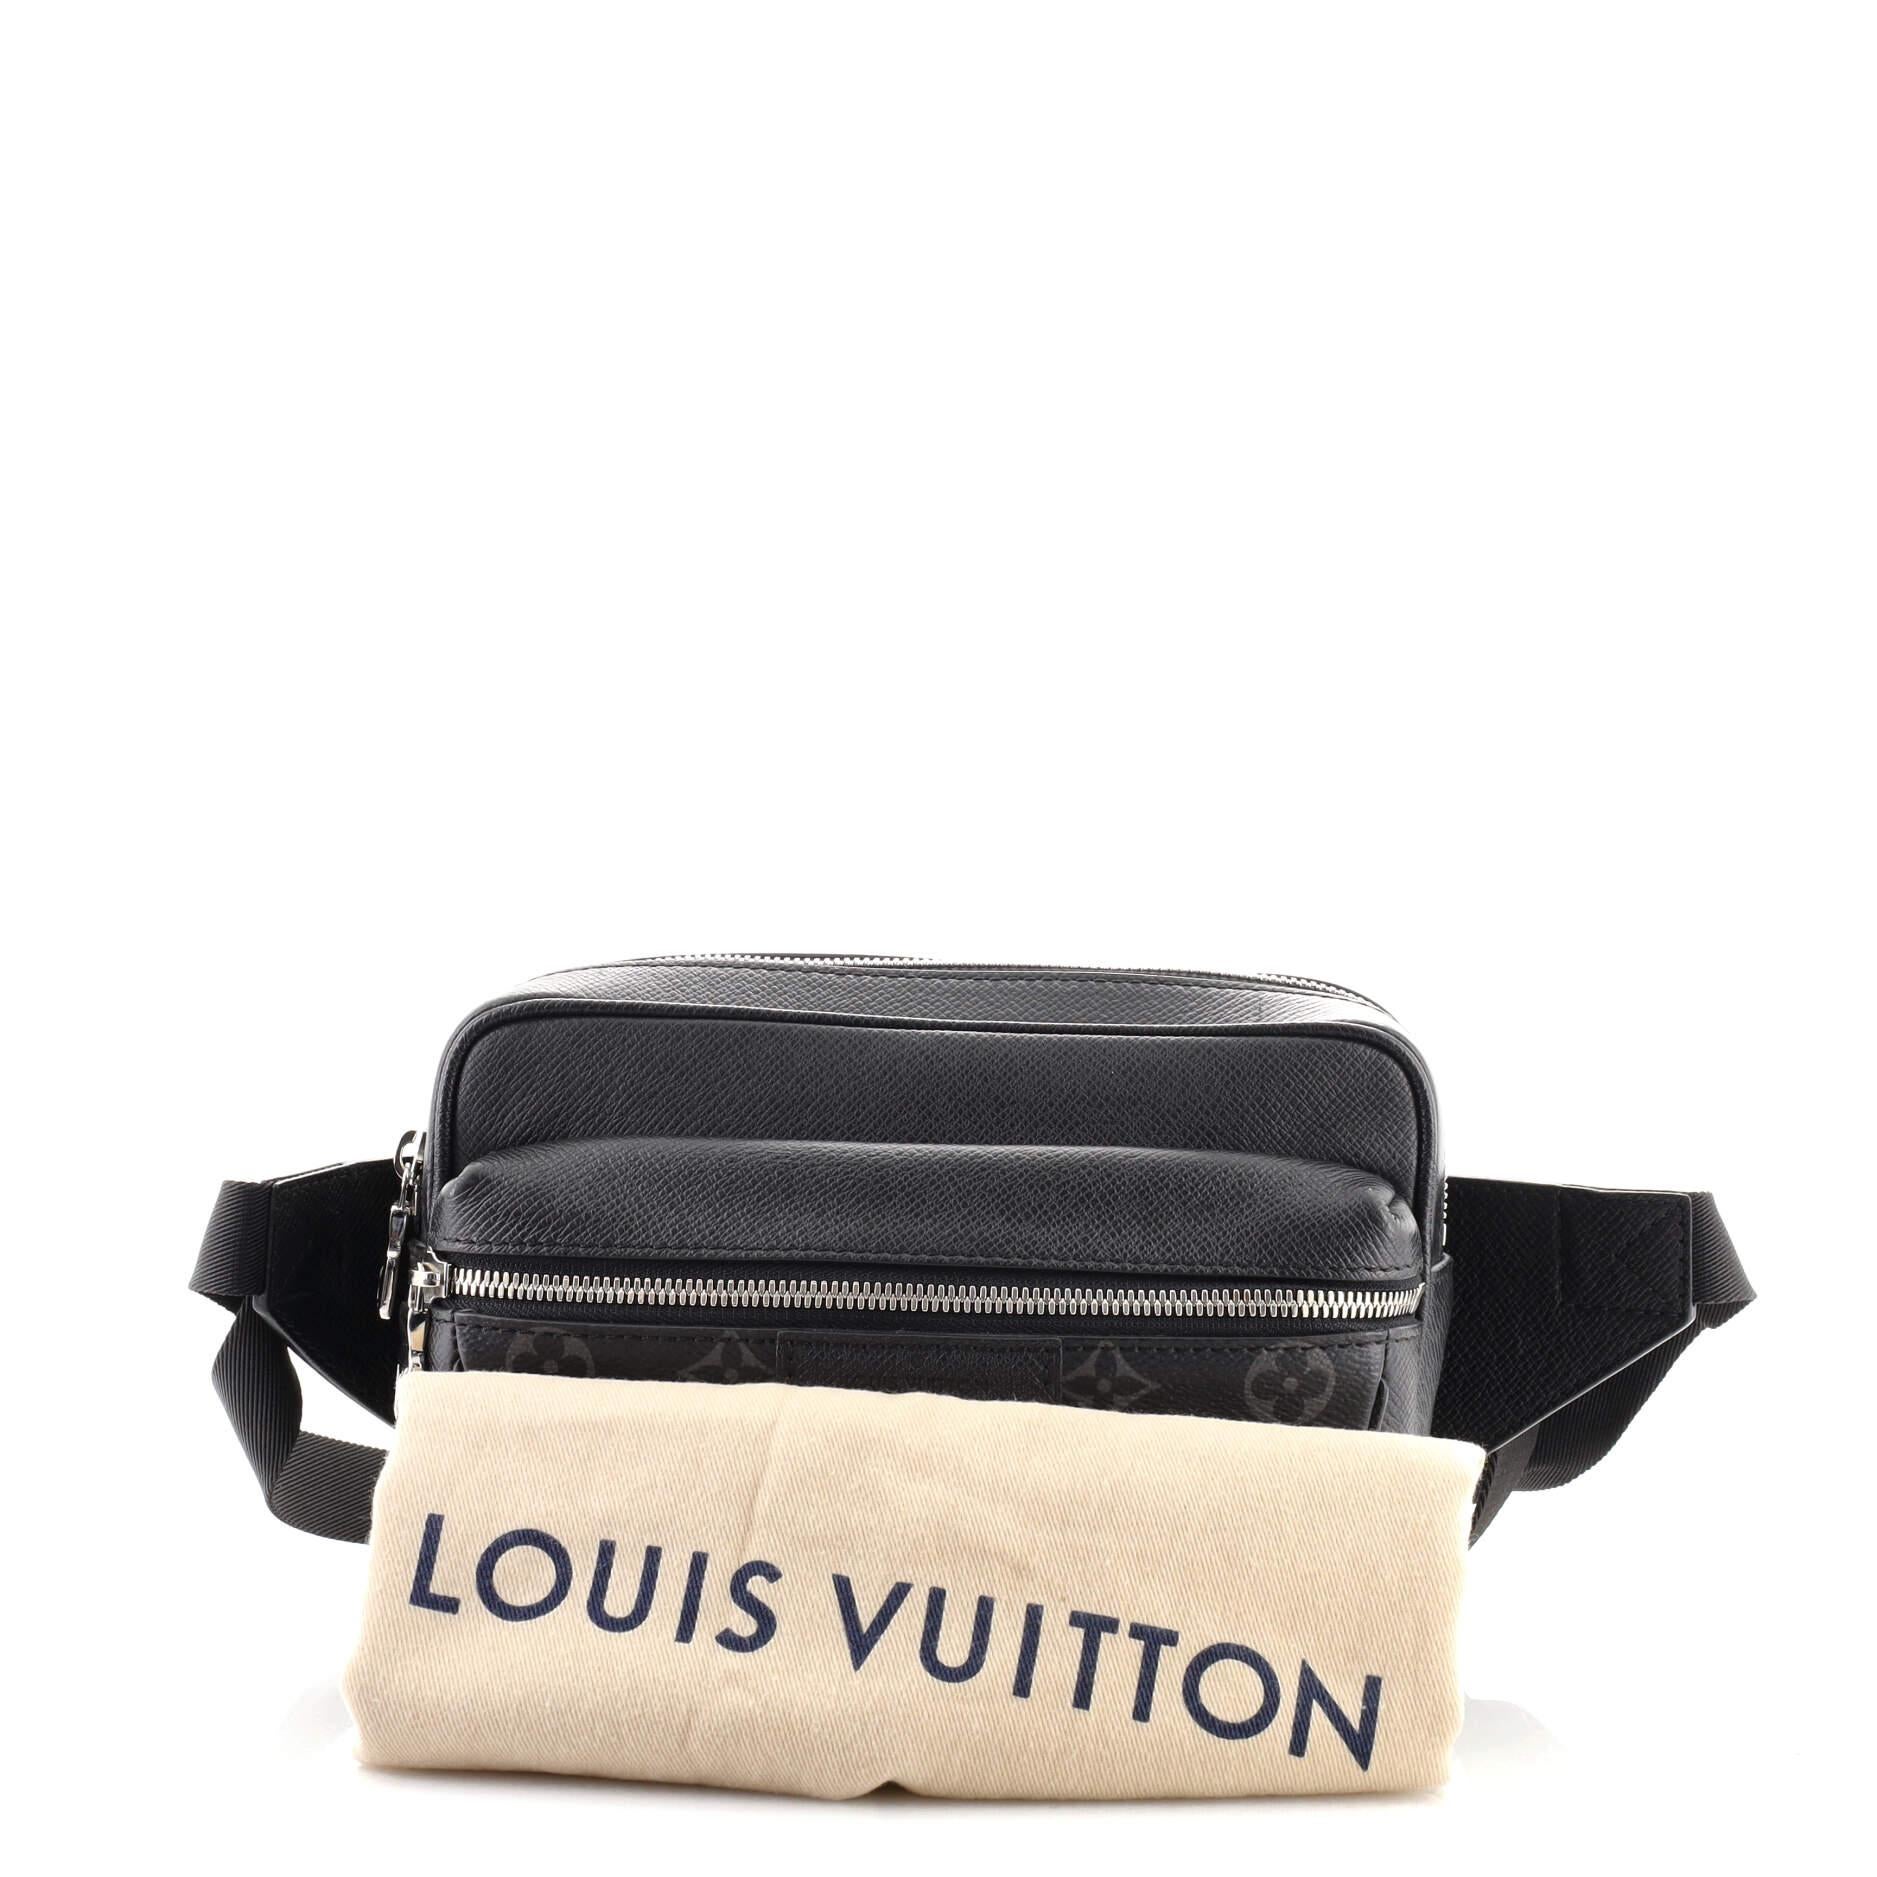 Bumbag Louis Vuitton Black - 6 For Sale on 1stDibs